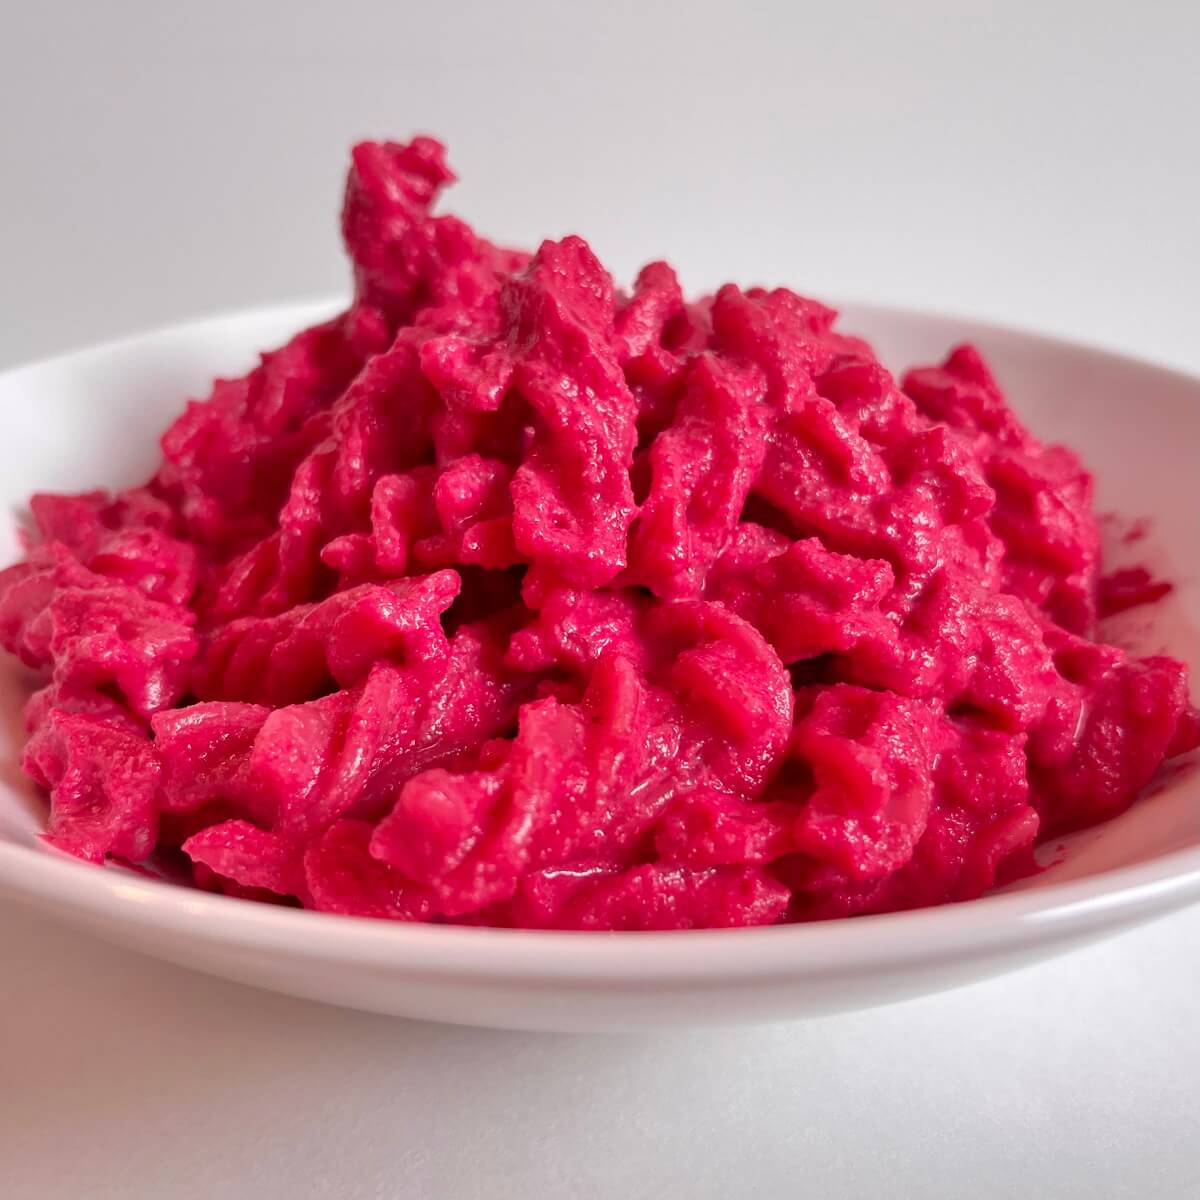 A dish of noodles covered in a pink beet pasta sauce.